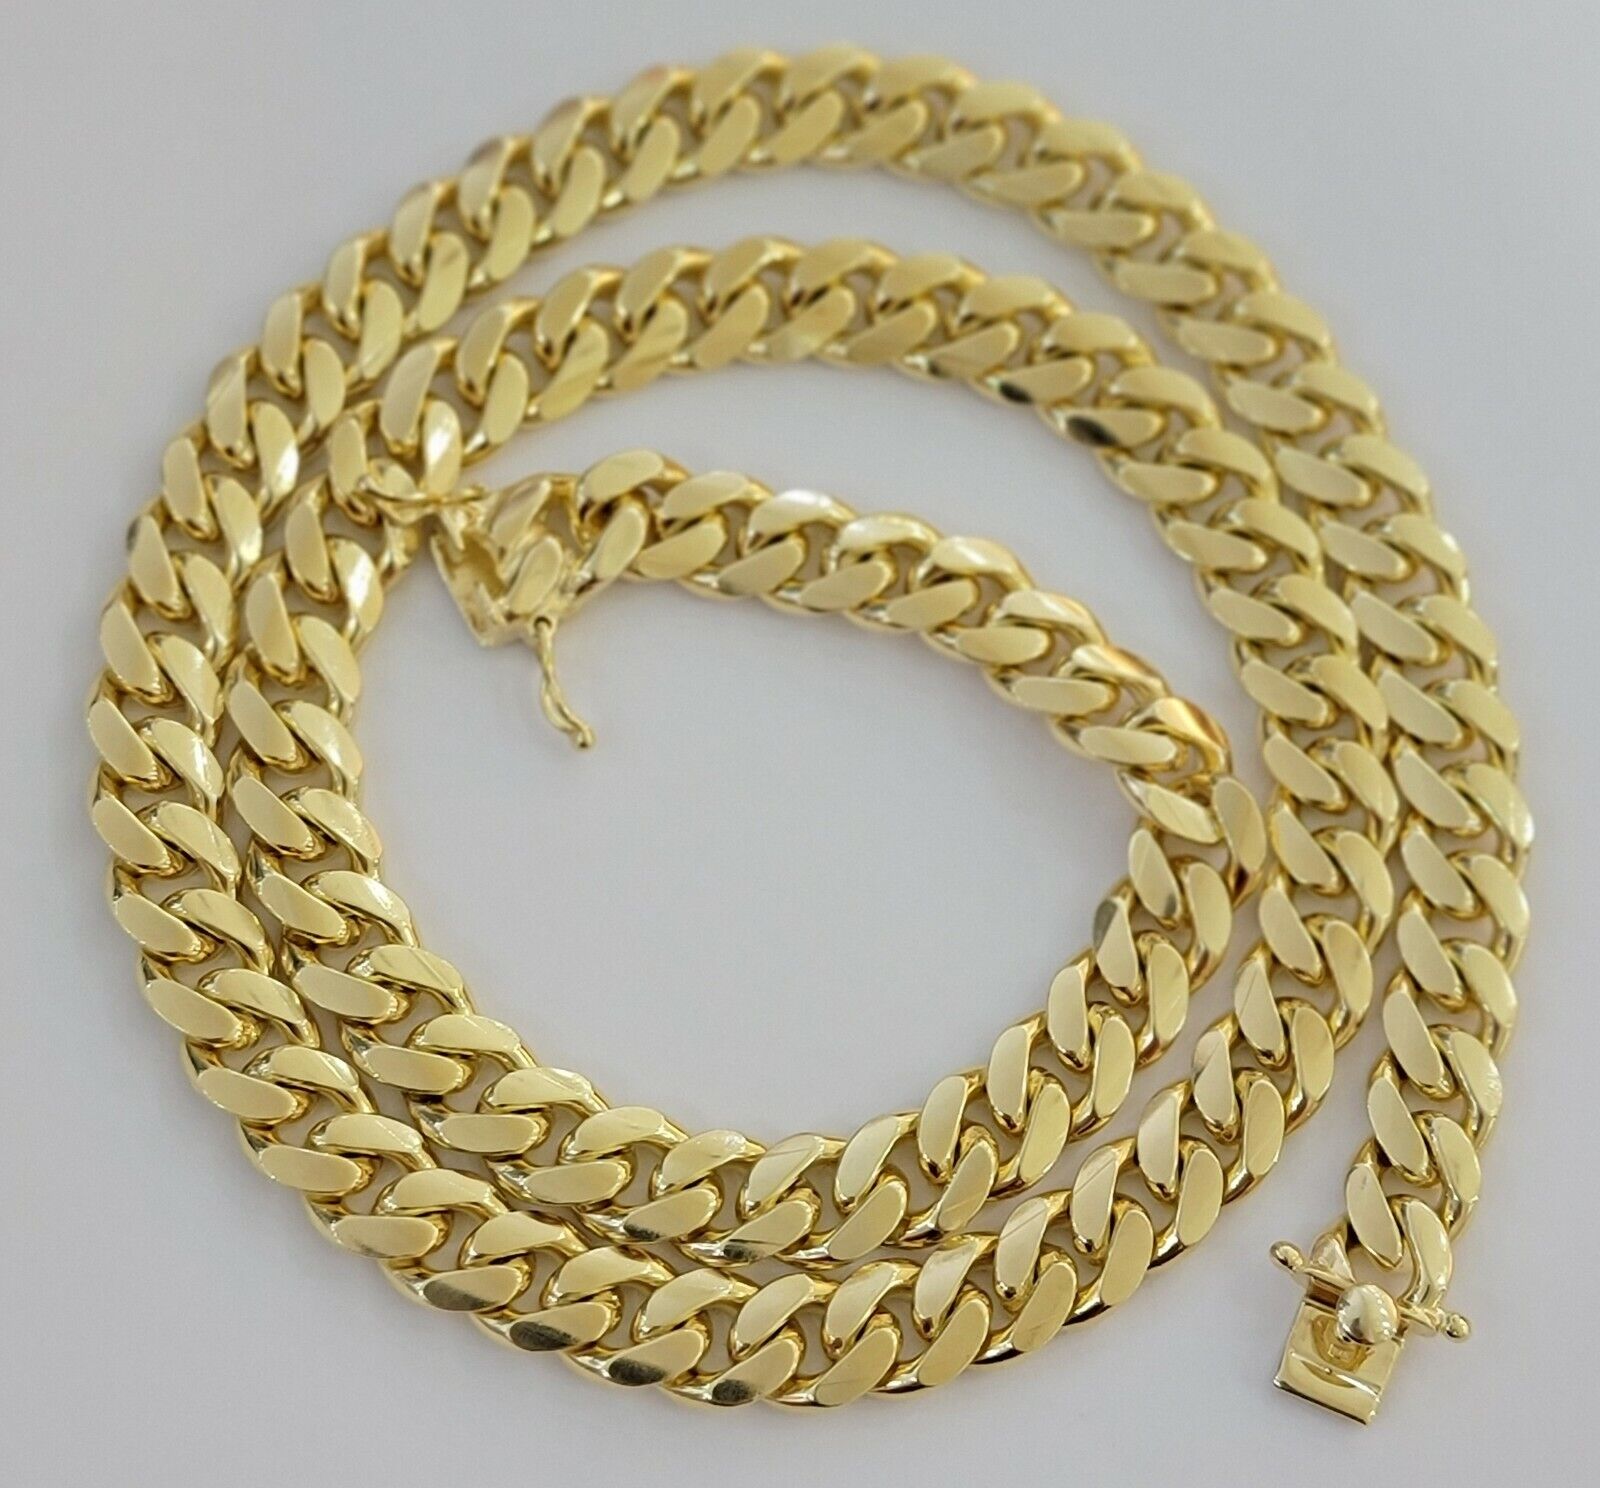 Solid 10k Gold Chain 10mm Miami Cuban Link Necklace 24" Men's Box Lock REAL 10kt